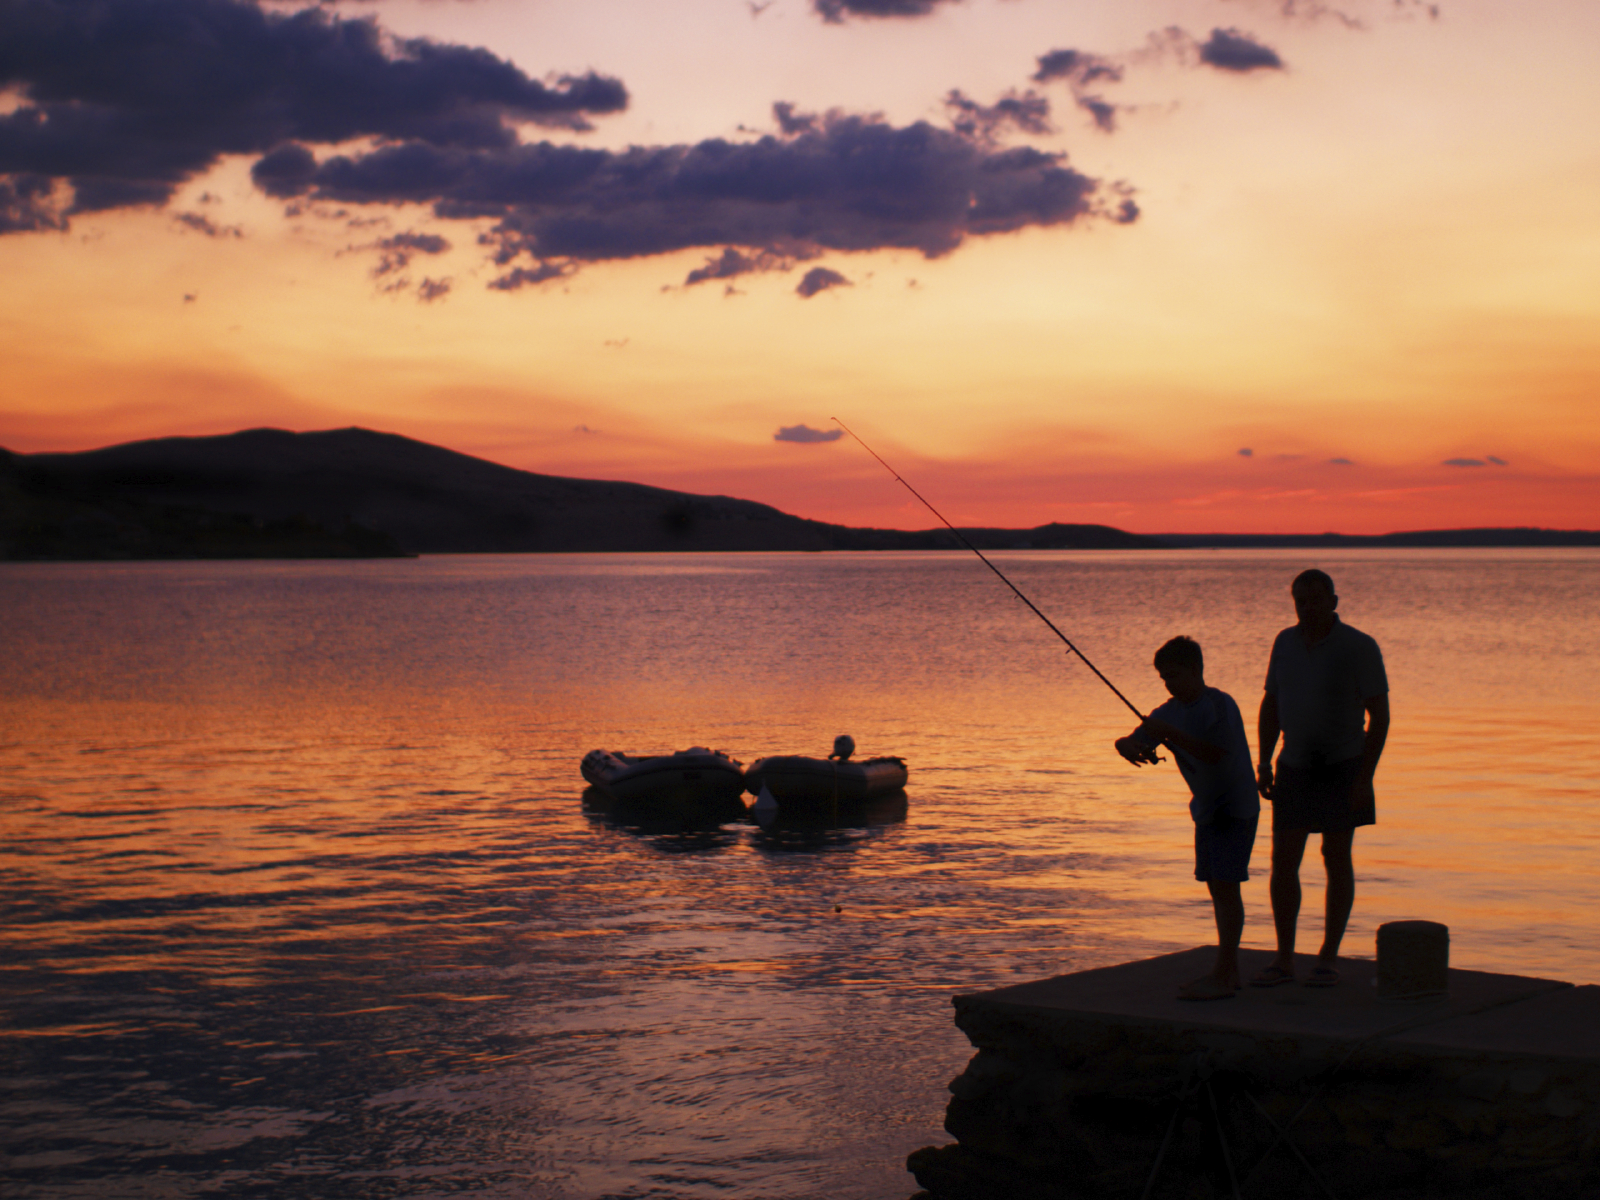 Two people fishing at sunset